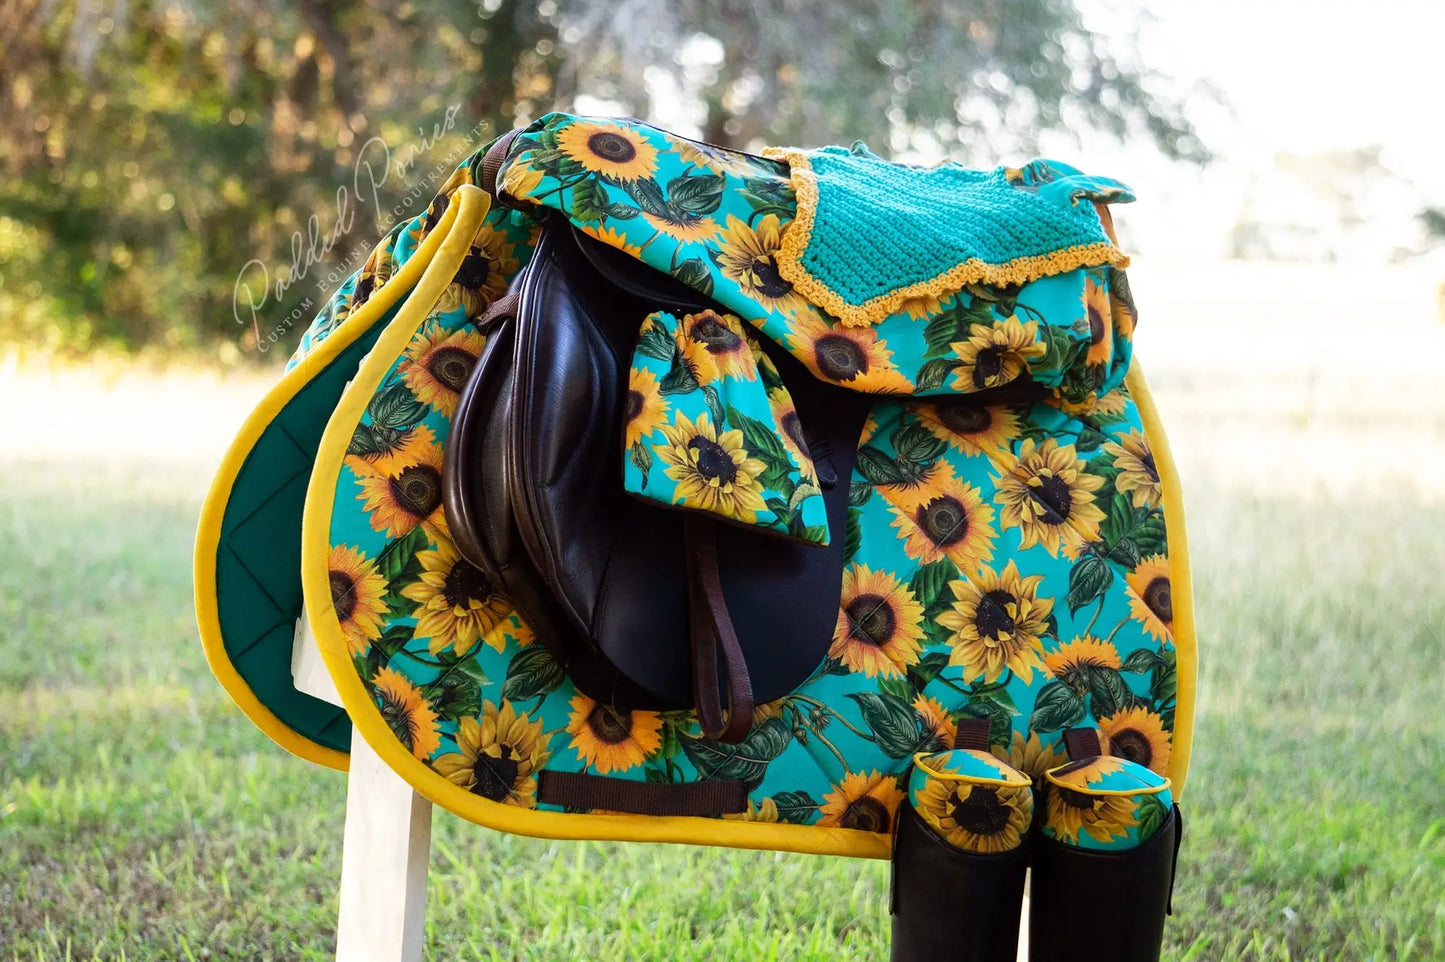 Turquoise Teal Aqua Yellow Sunflowers Floral All Purpose Saddle Cover with Matching Saddle Pad, Bonnet, Boot Trees, and Stirrup Covers